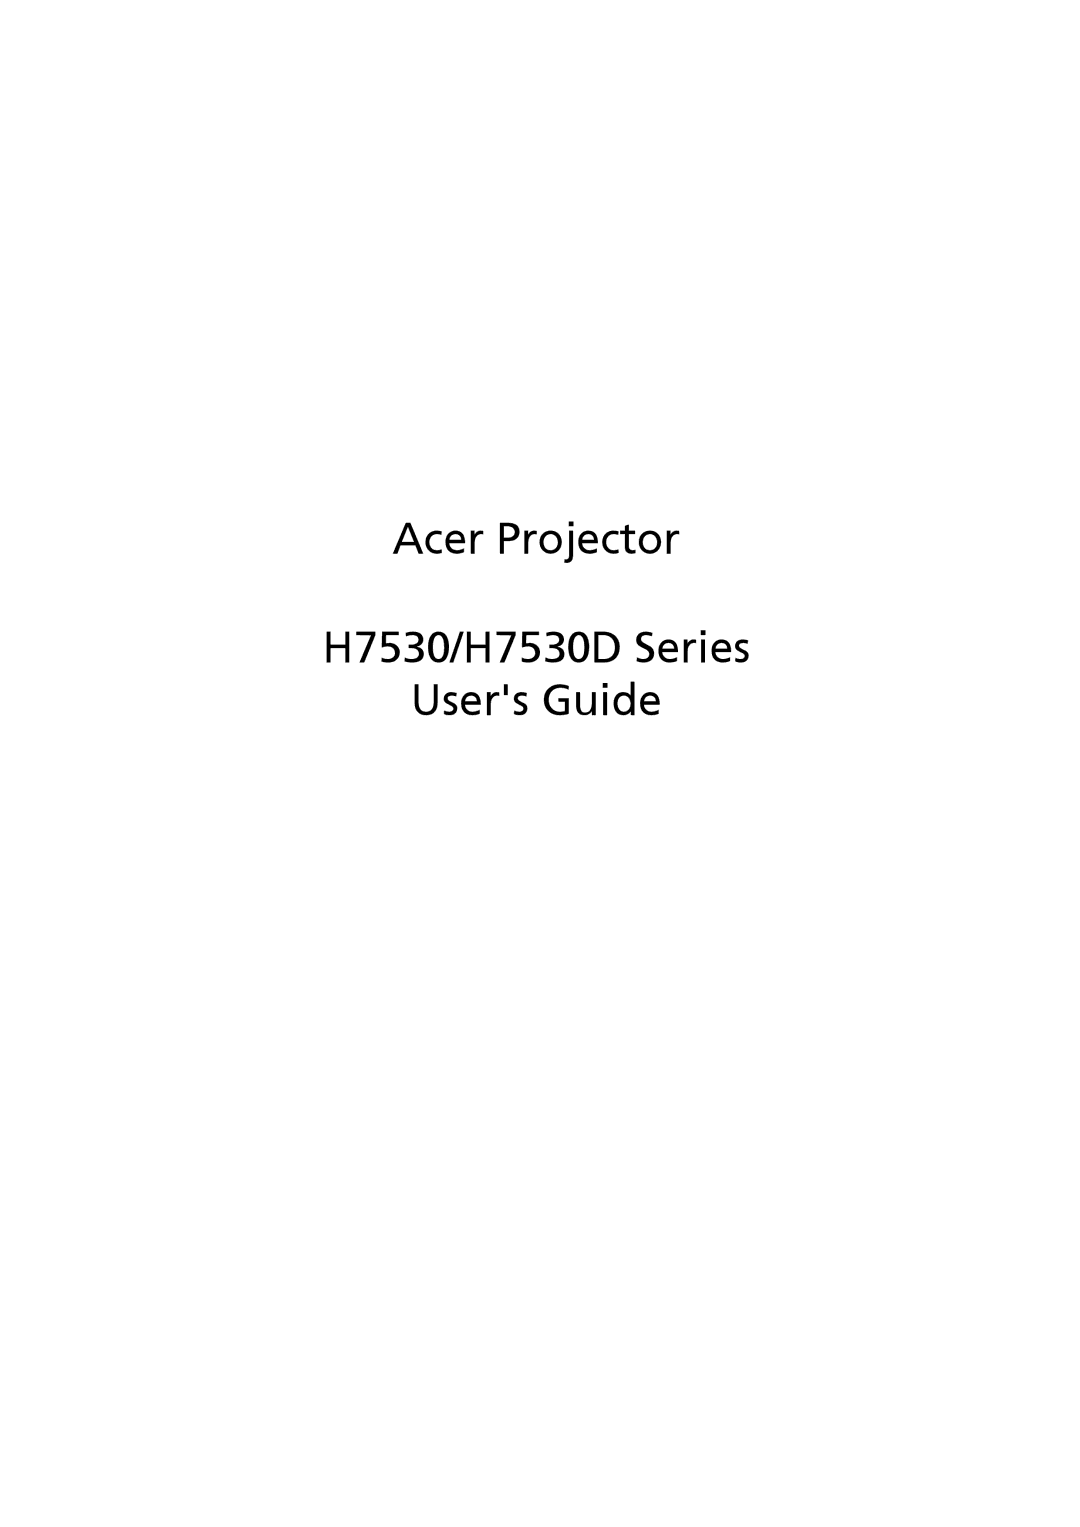 Acer H7530 Series manual Acer Projector H7530/H7530D Series Users Guide 